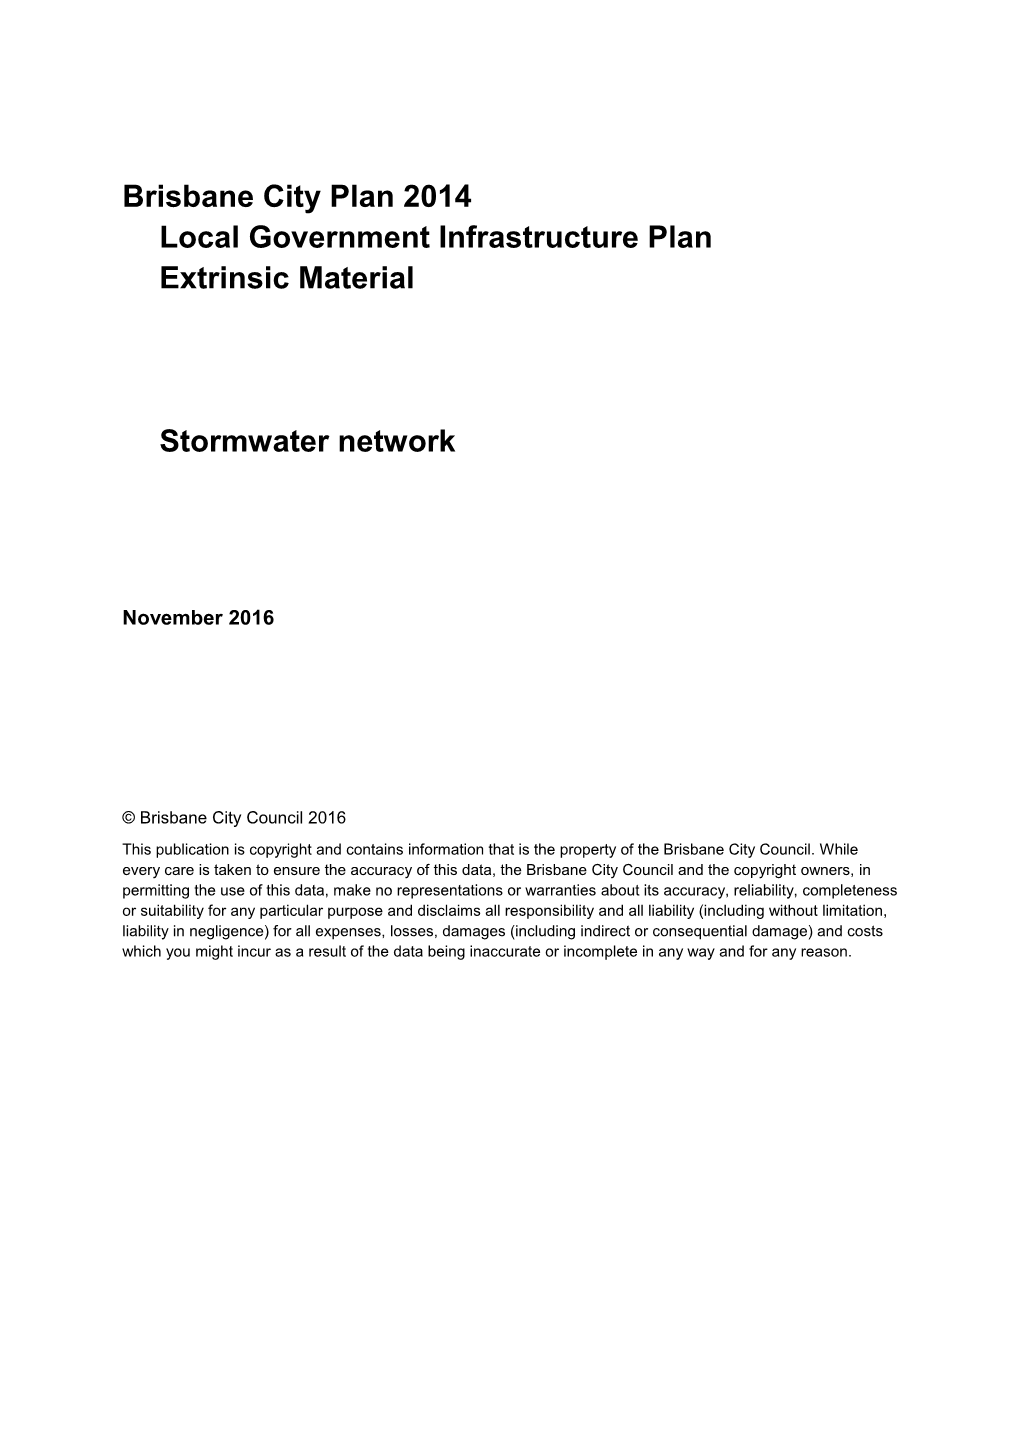 Brisbane City Plan 2014Local Government Infrastructure Planextrinsic Materialstormwater Network